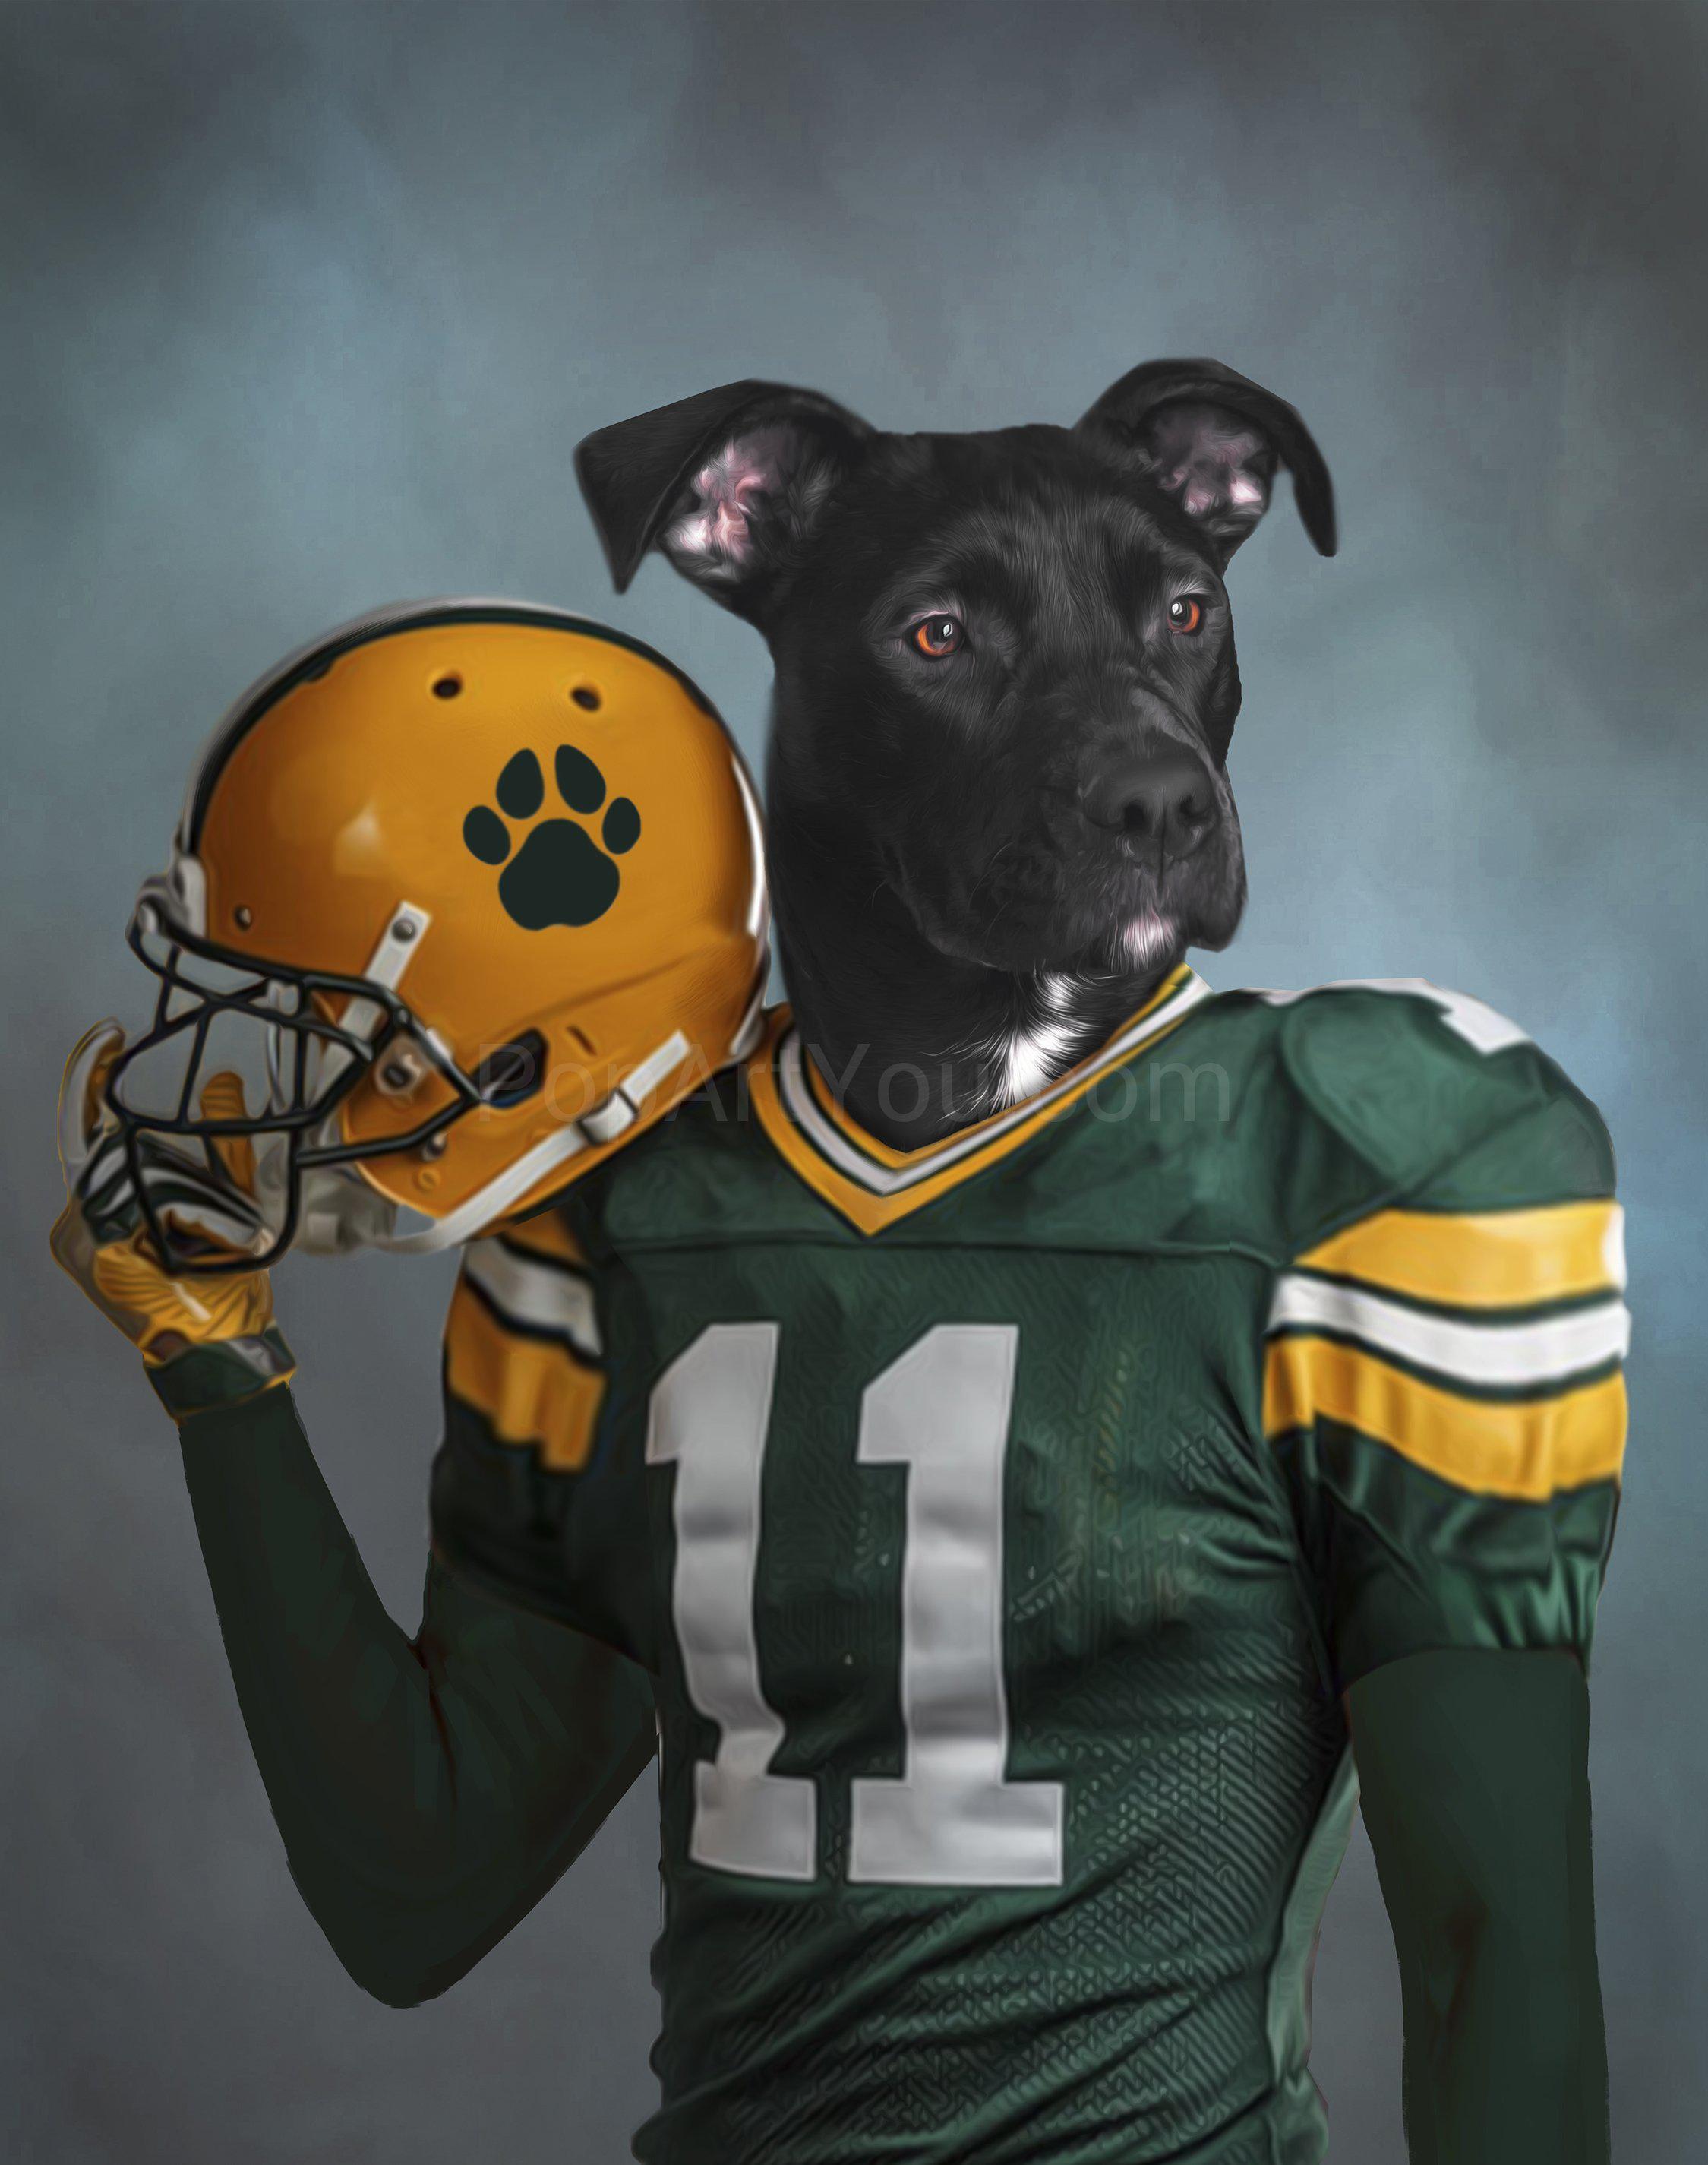 The portrait shows a dog dressed in green football attire with a yellow helmet